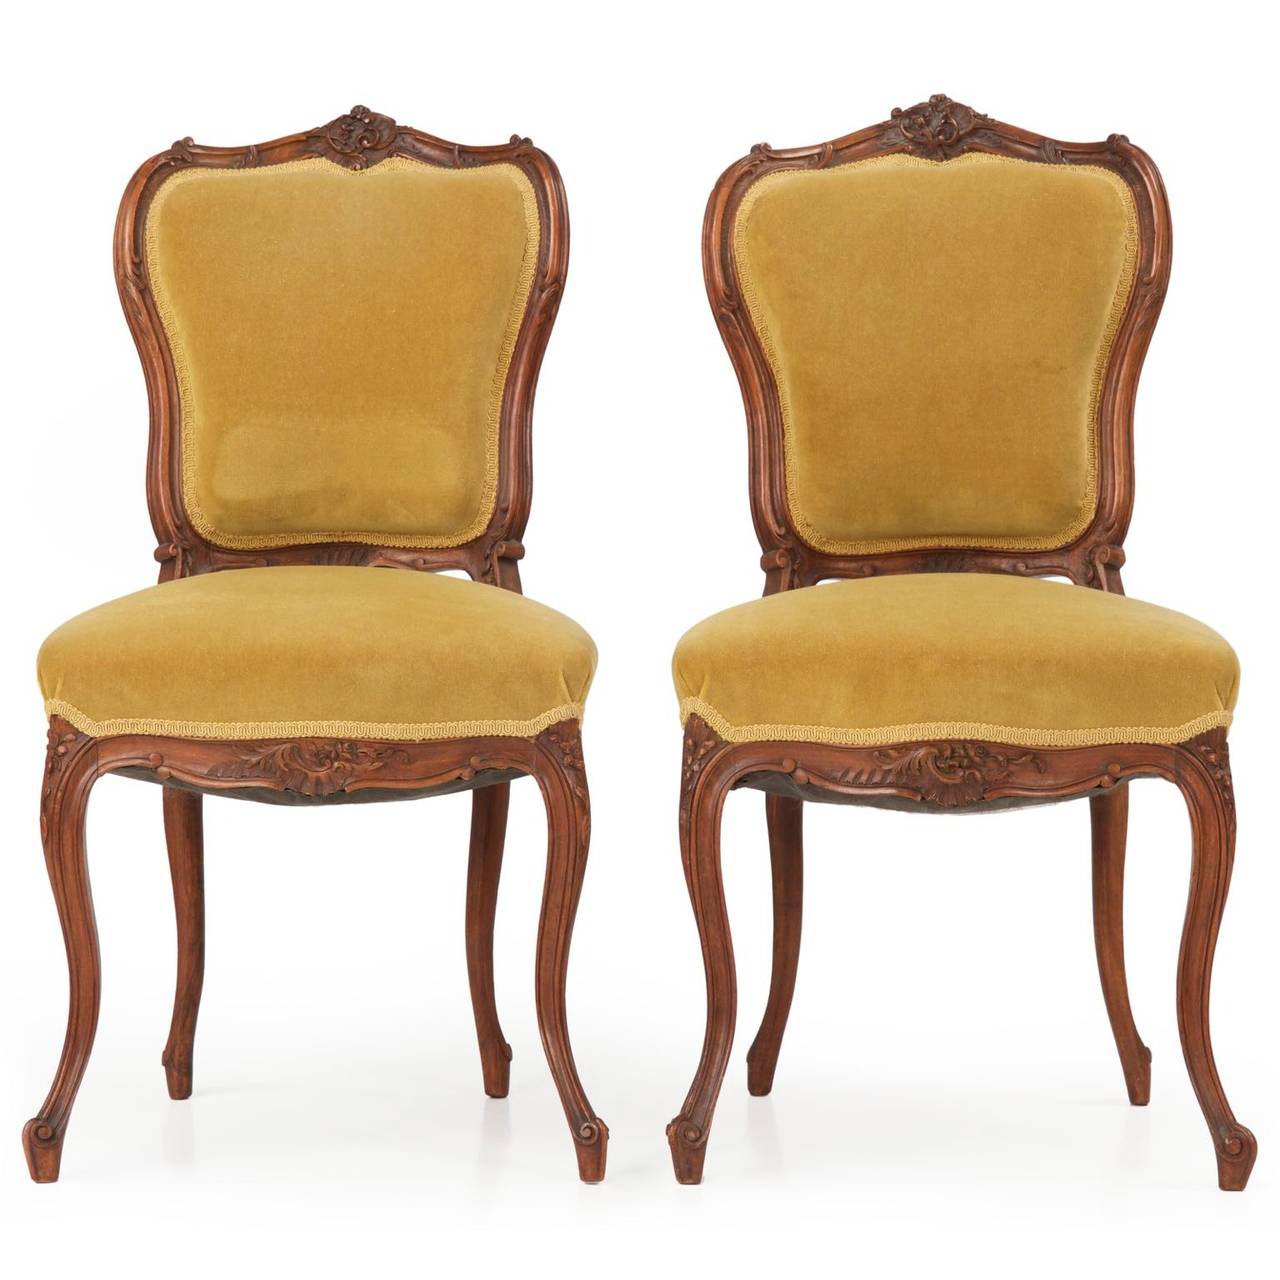 Likely crafted in England circa 1880, this suite consists of two arm chairs, a pair of side chairs and a settee of nicely diminutive proportions.  Each crest is deeply and robustly carved with an inset series of C-scroll flourishes around hints of